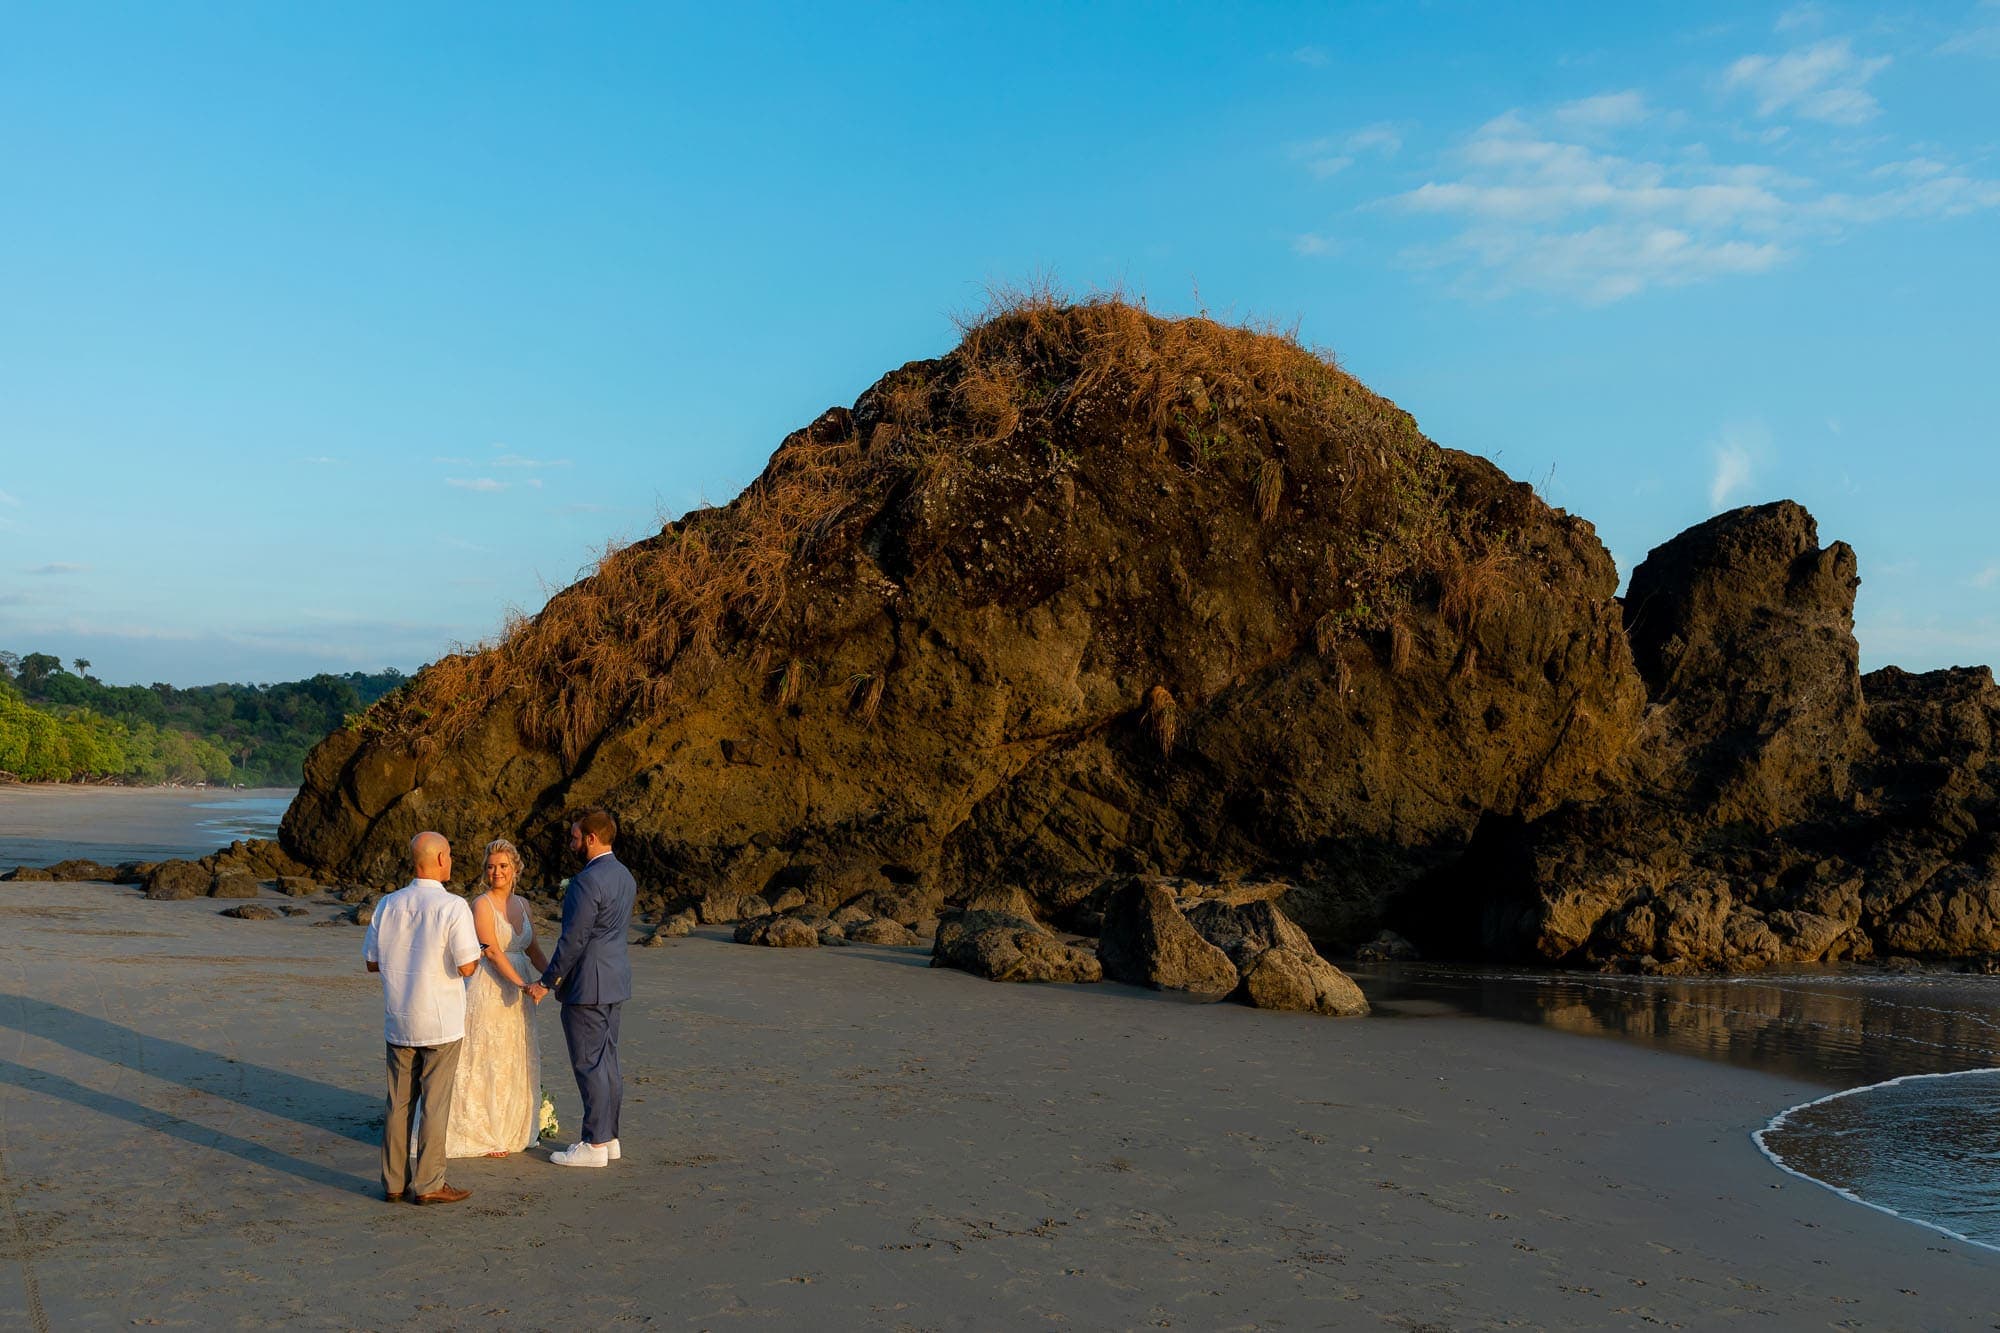 A "just the two of us" ceremony on the beach